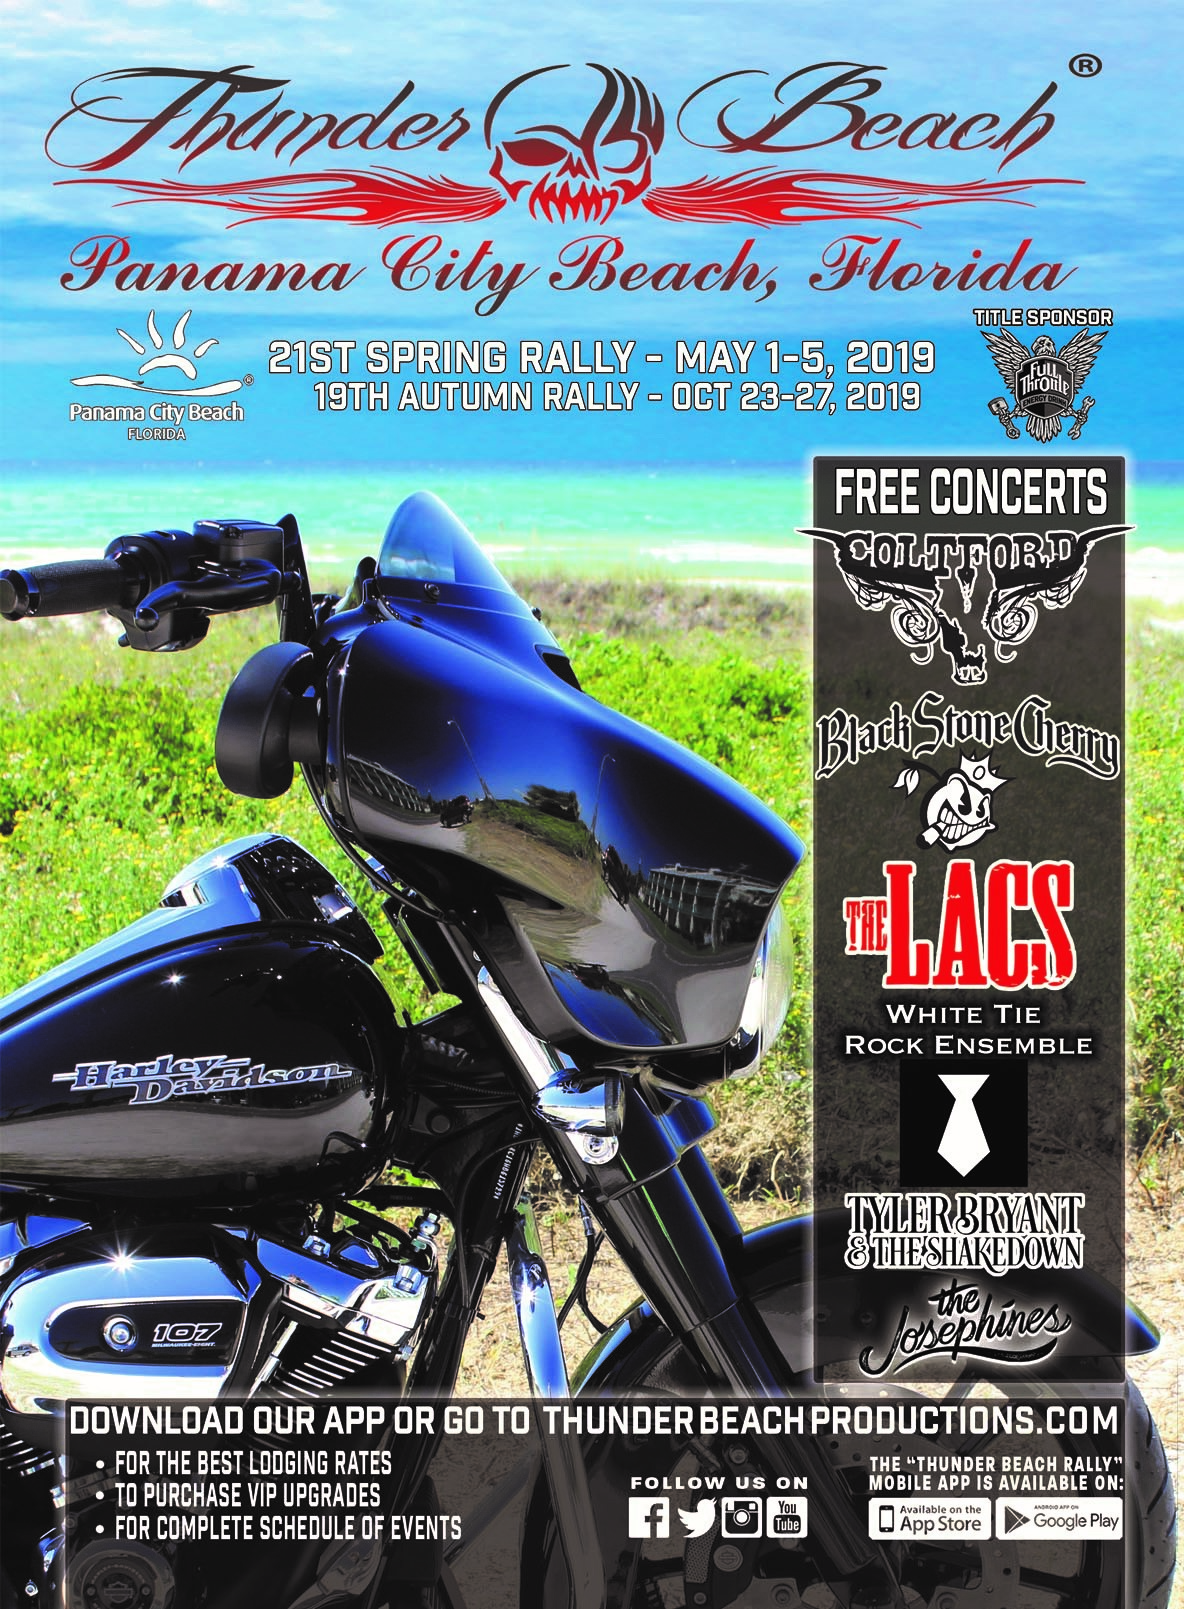 21st Annual Thunder Beach Spring Rally Places 2 Ride